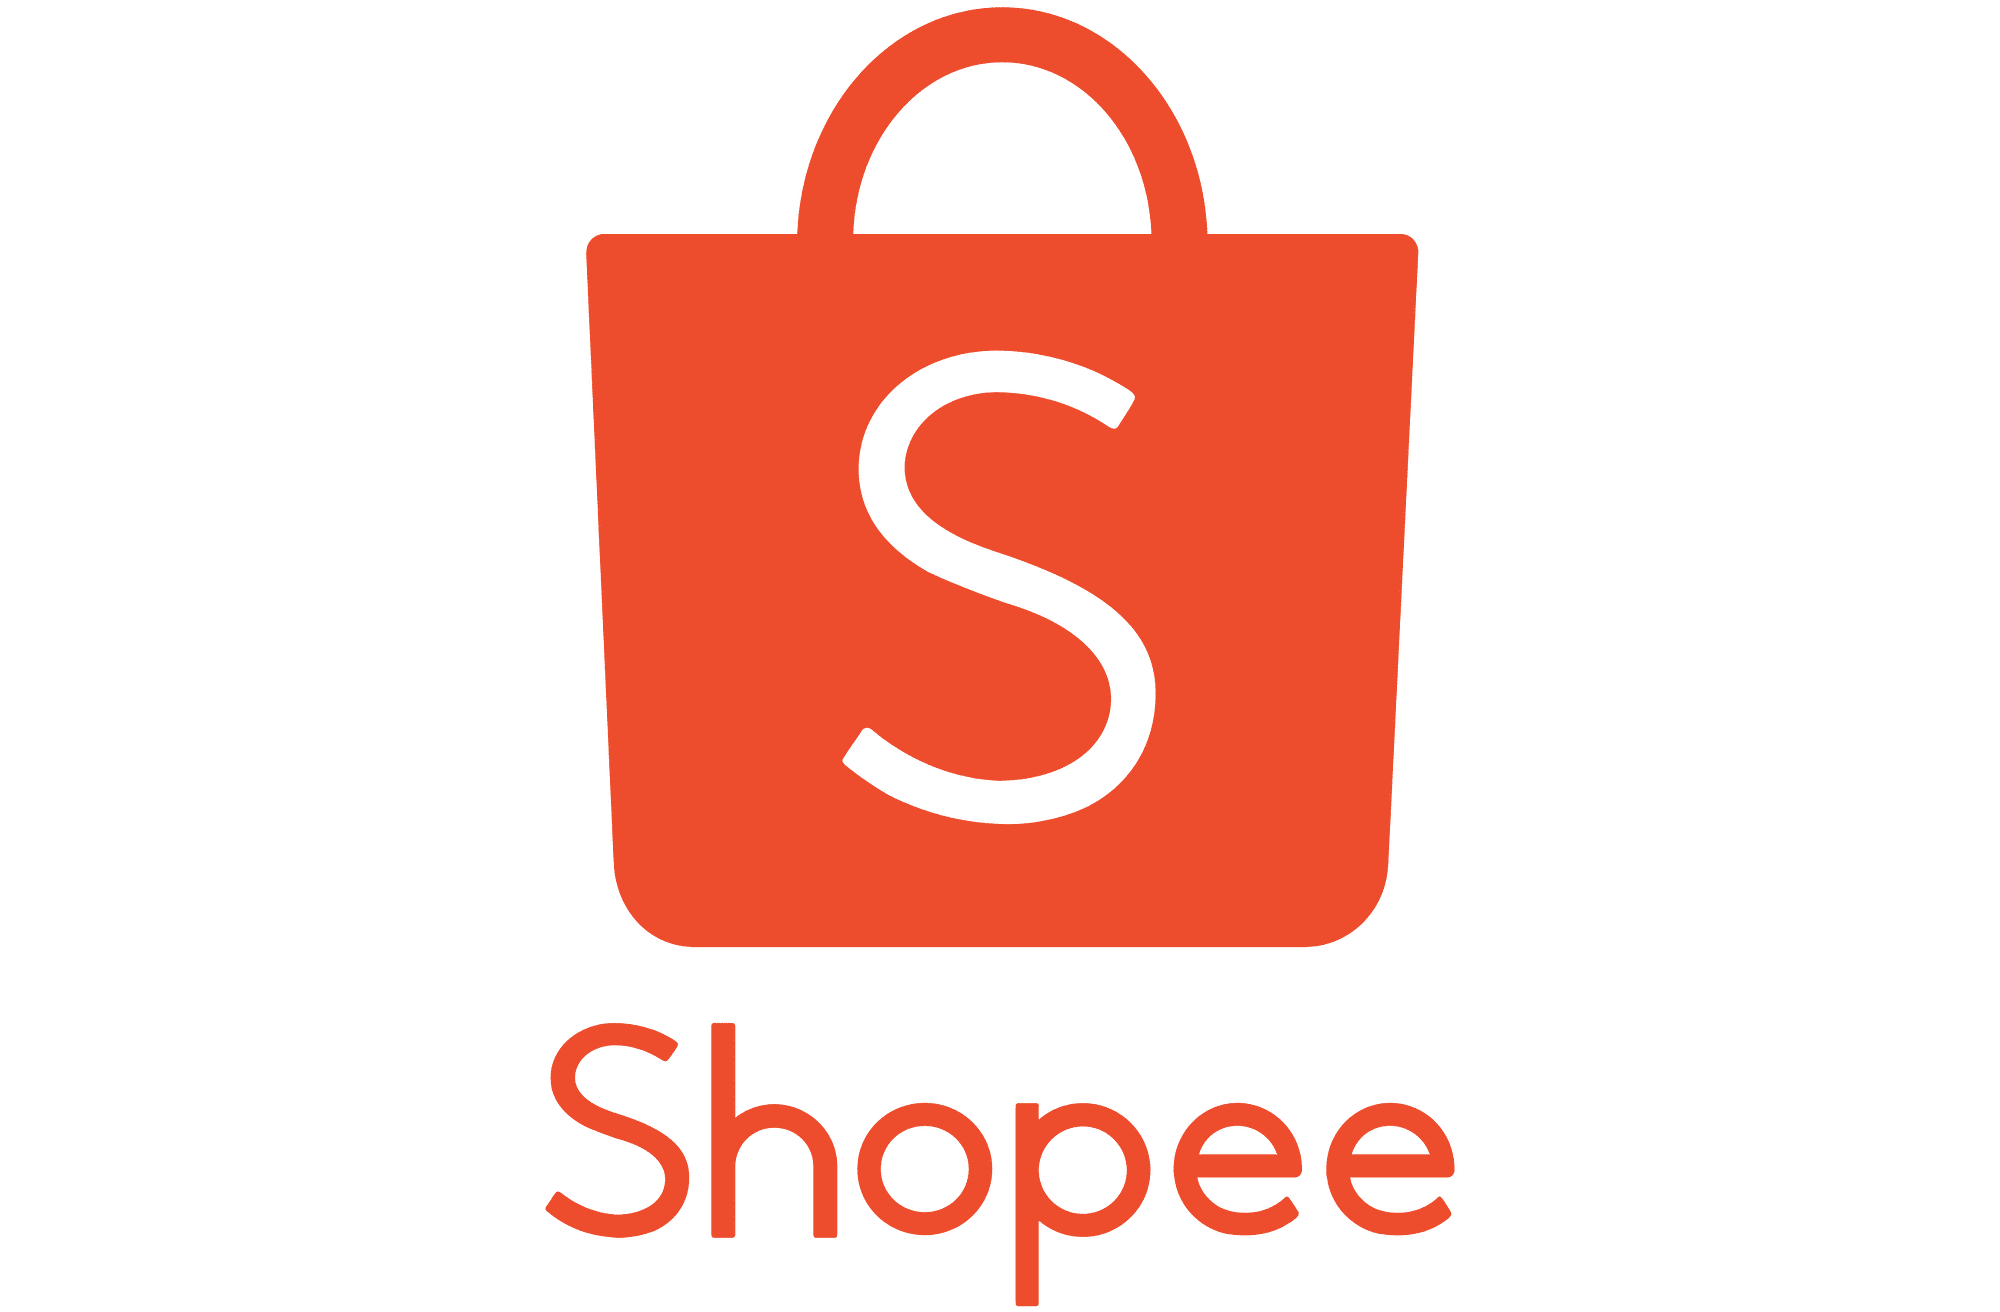 Buy our products on Shopee